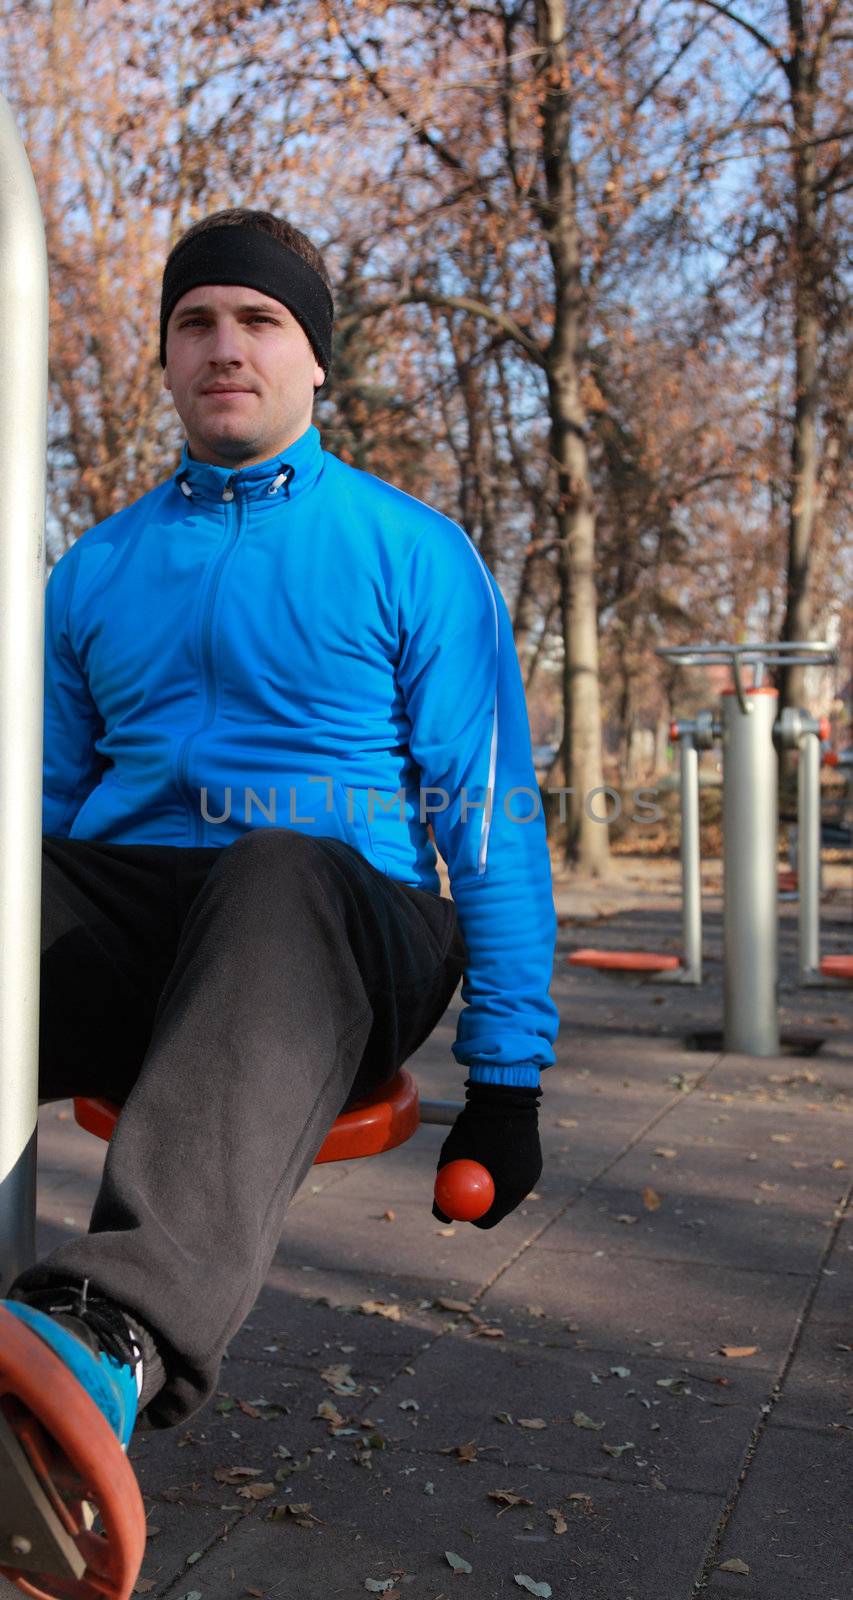 A young man doing exercise outdoors in a public park.